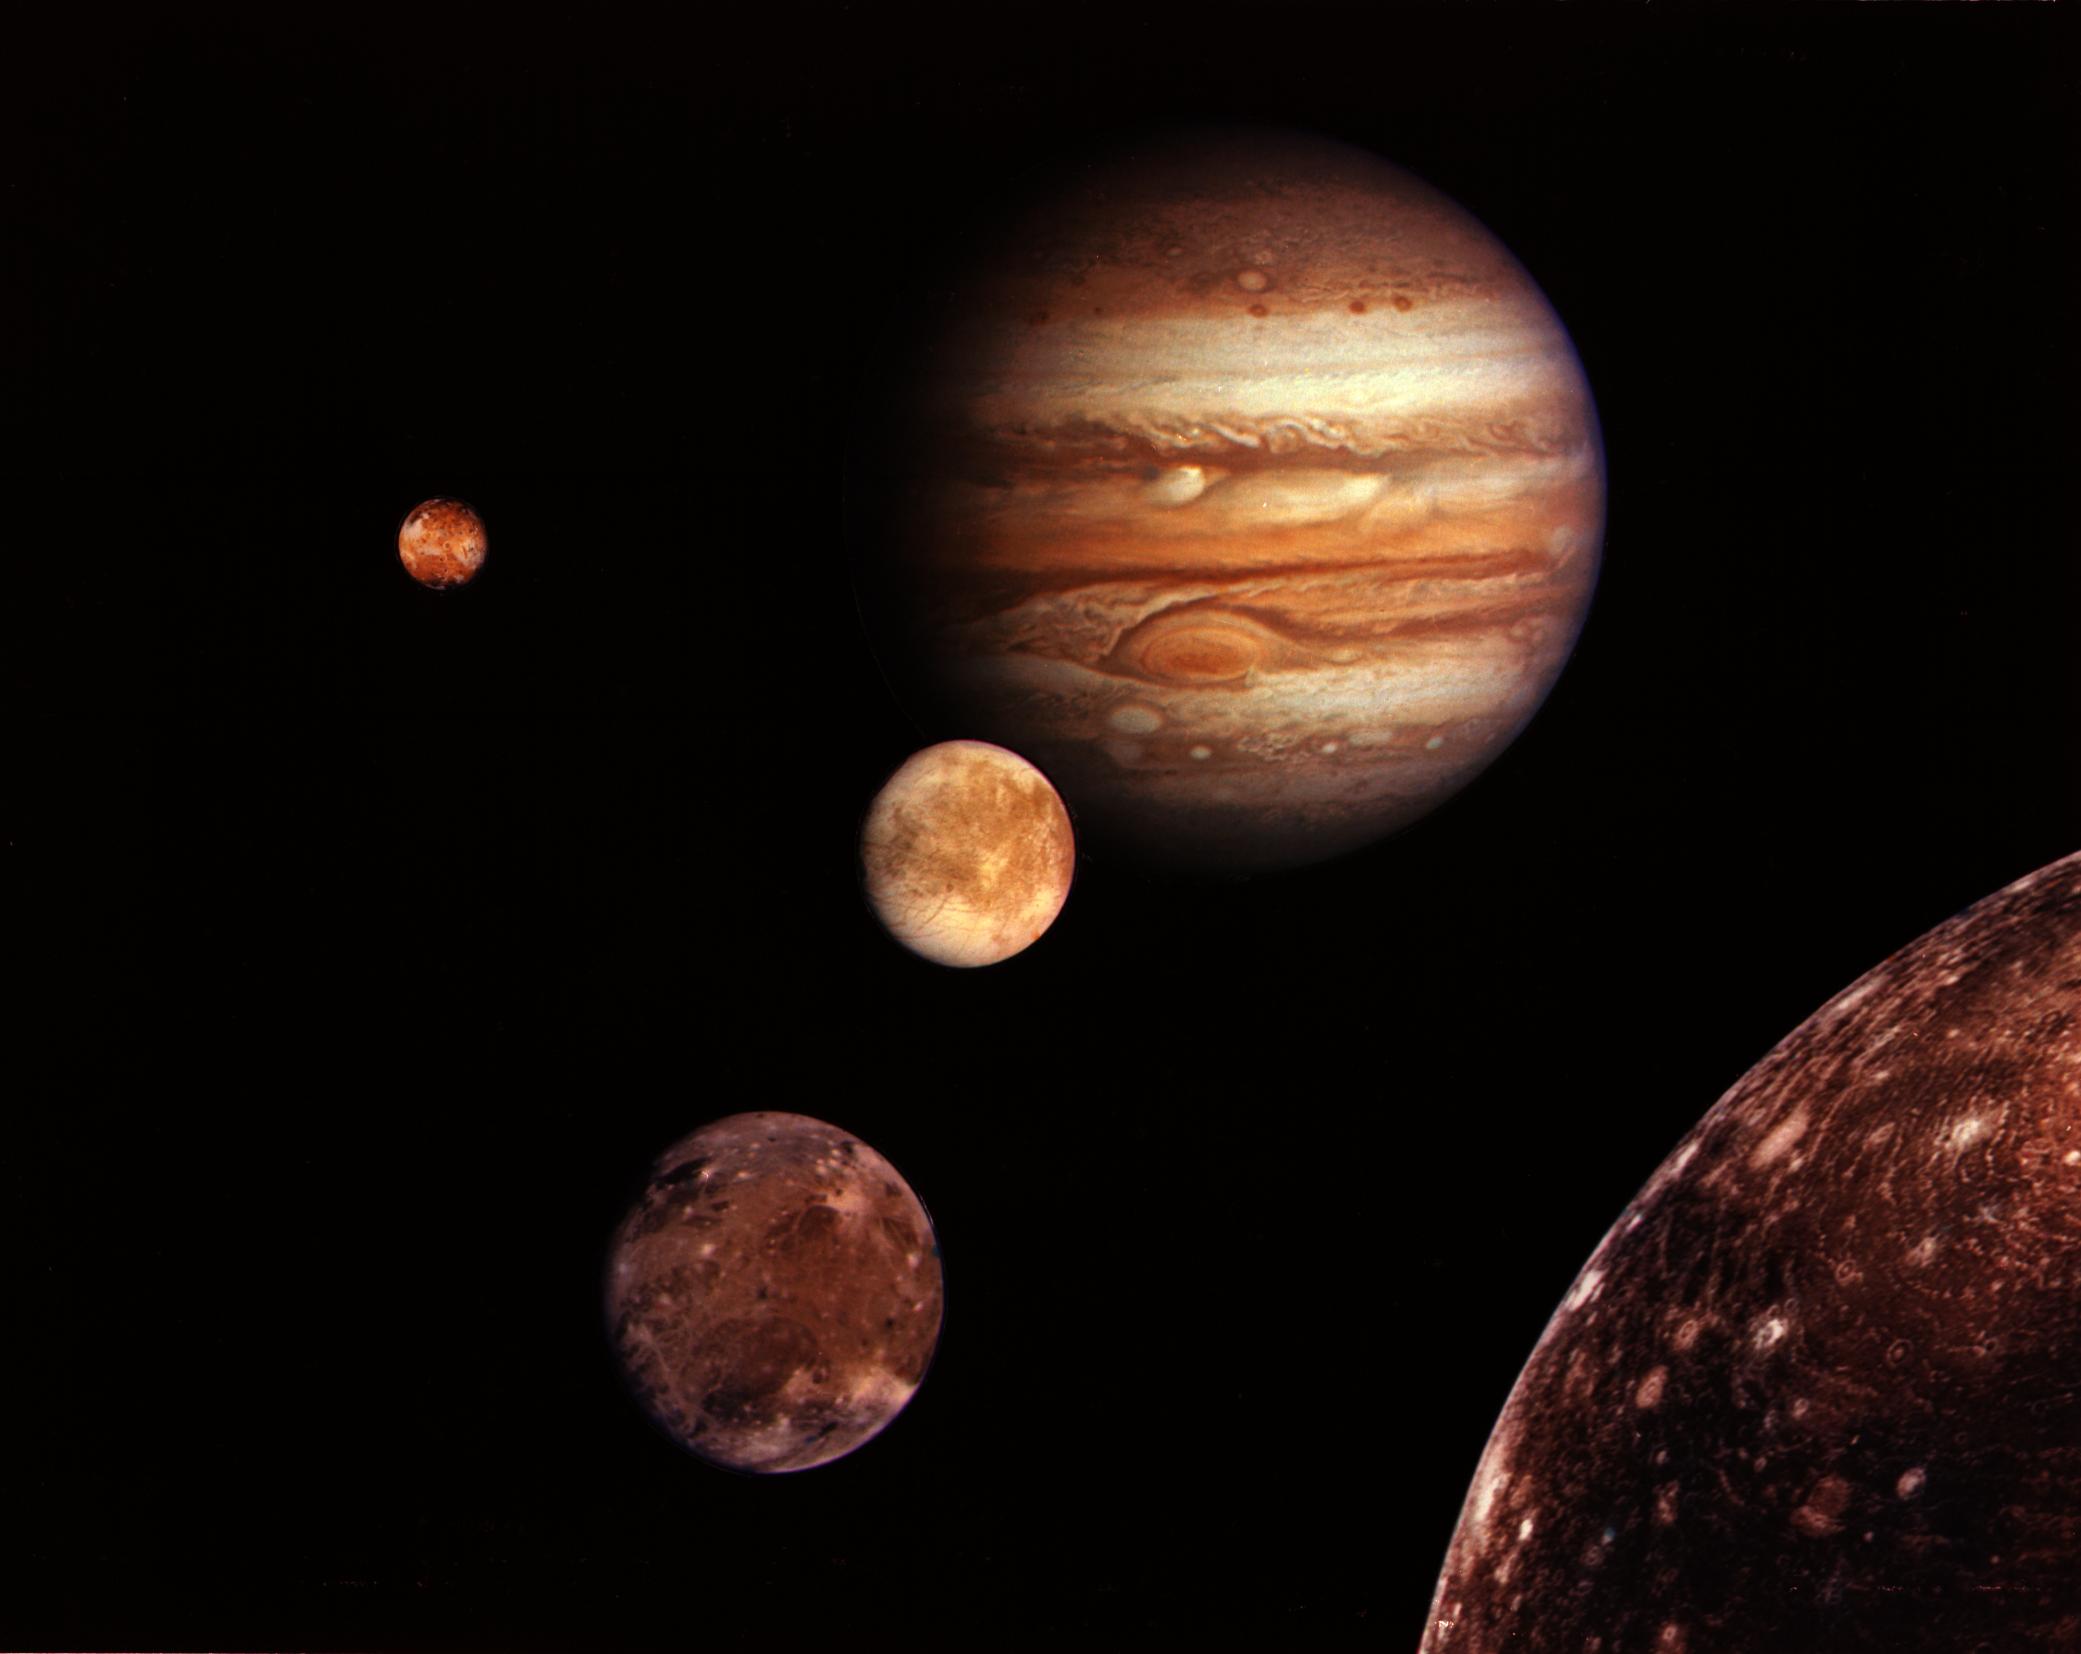 Jupiter and its four largest moons